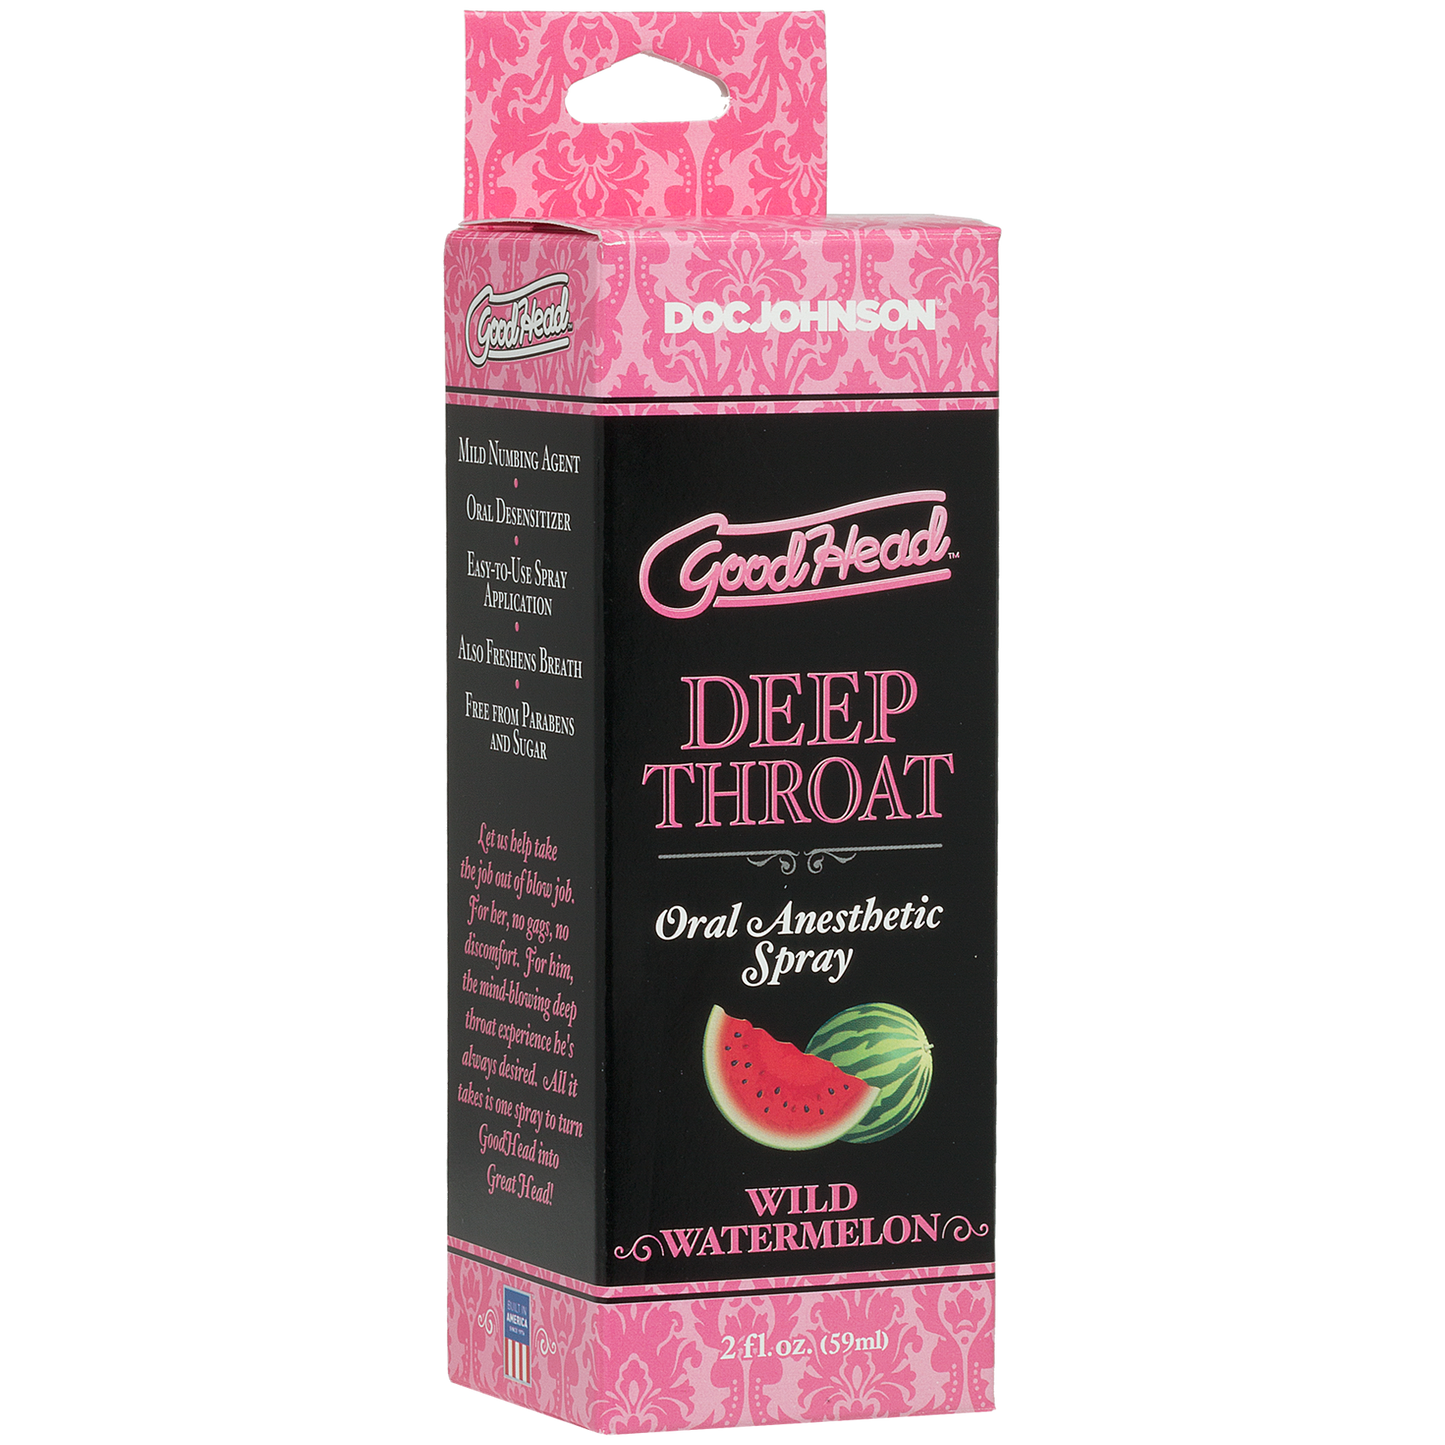 Deep Throat Oral Anesthetic Spray 2oz in its box (watermelon).